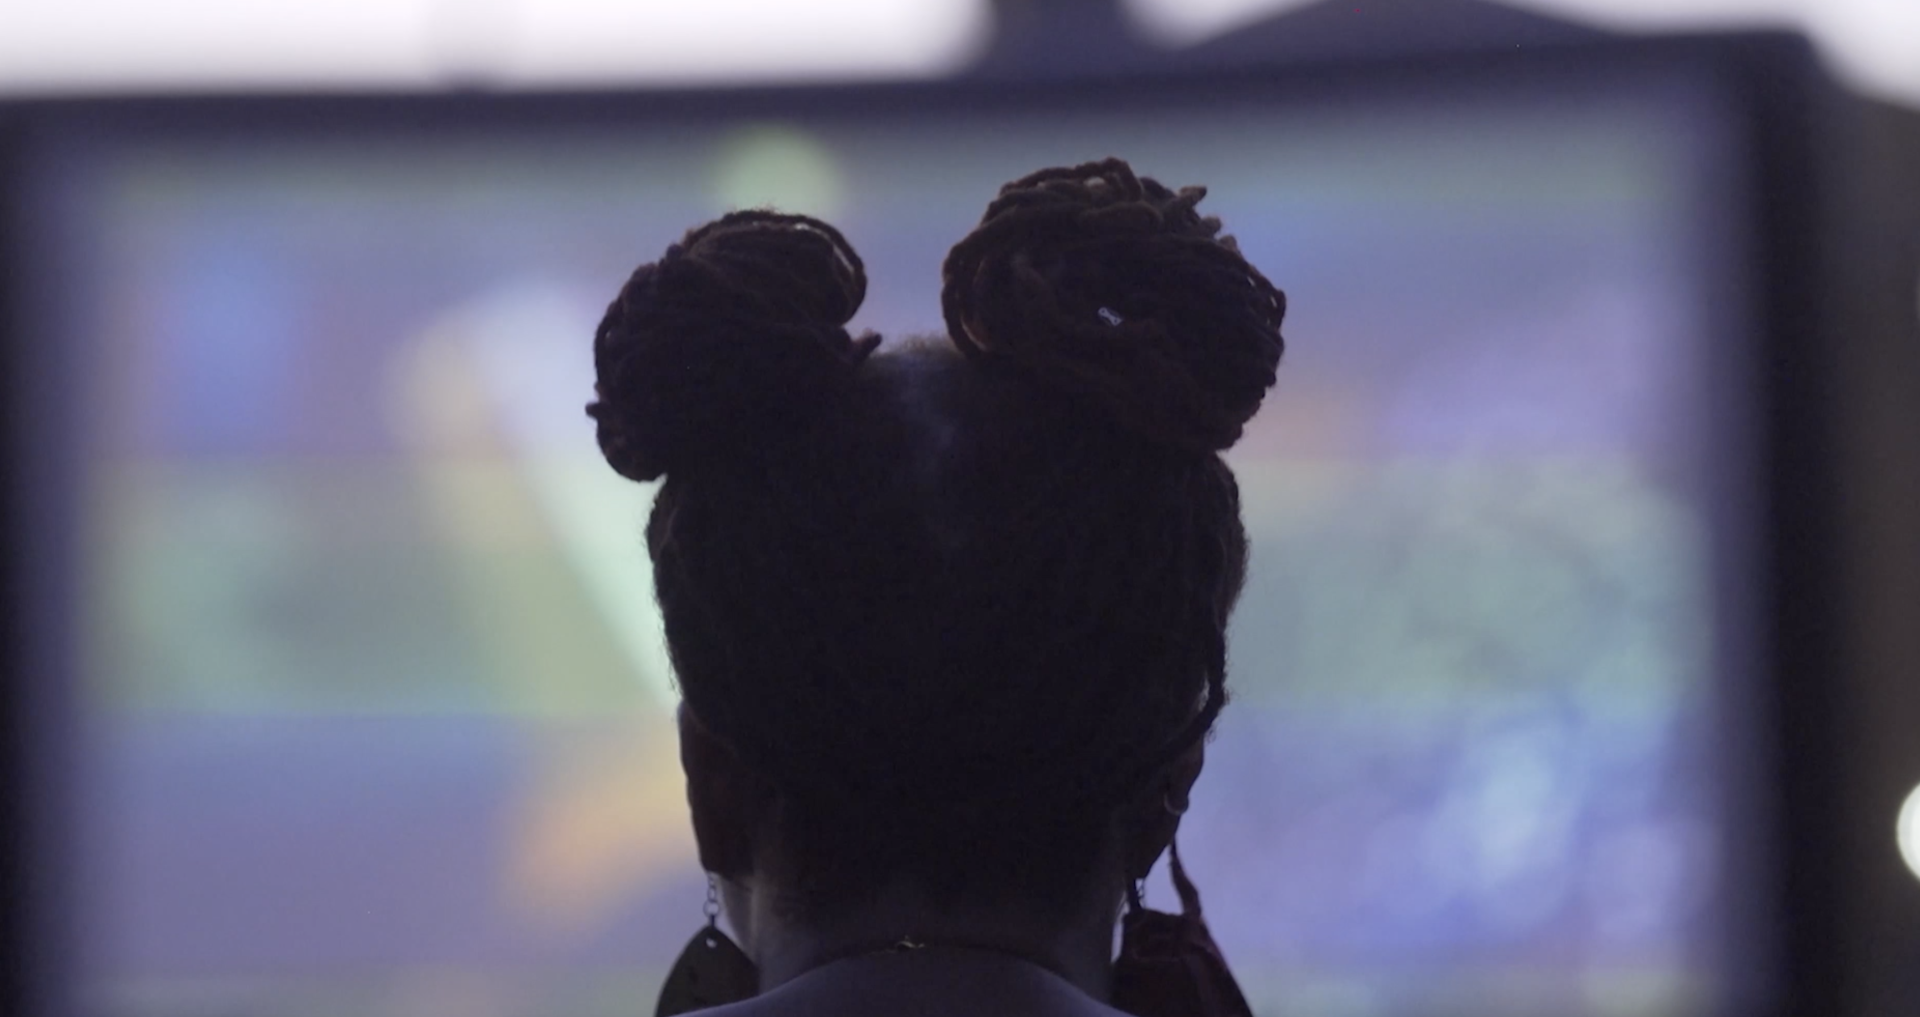 A person with two buns in their hair watches something on a large screen (blurry in the background) as we see them from behind silhouetted.